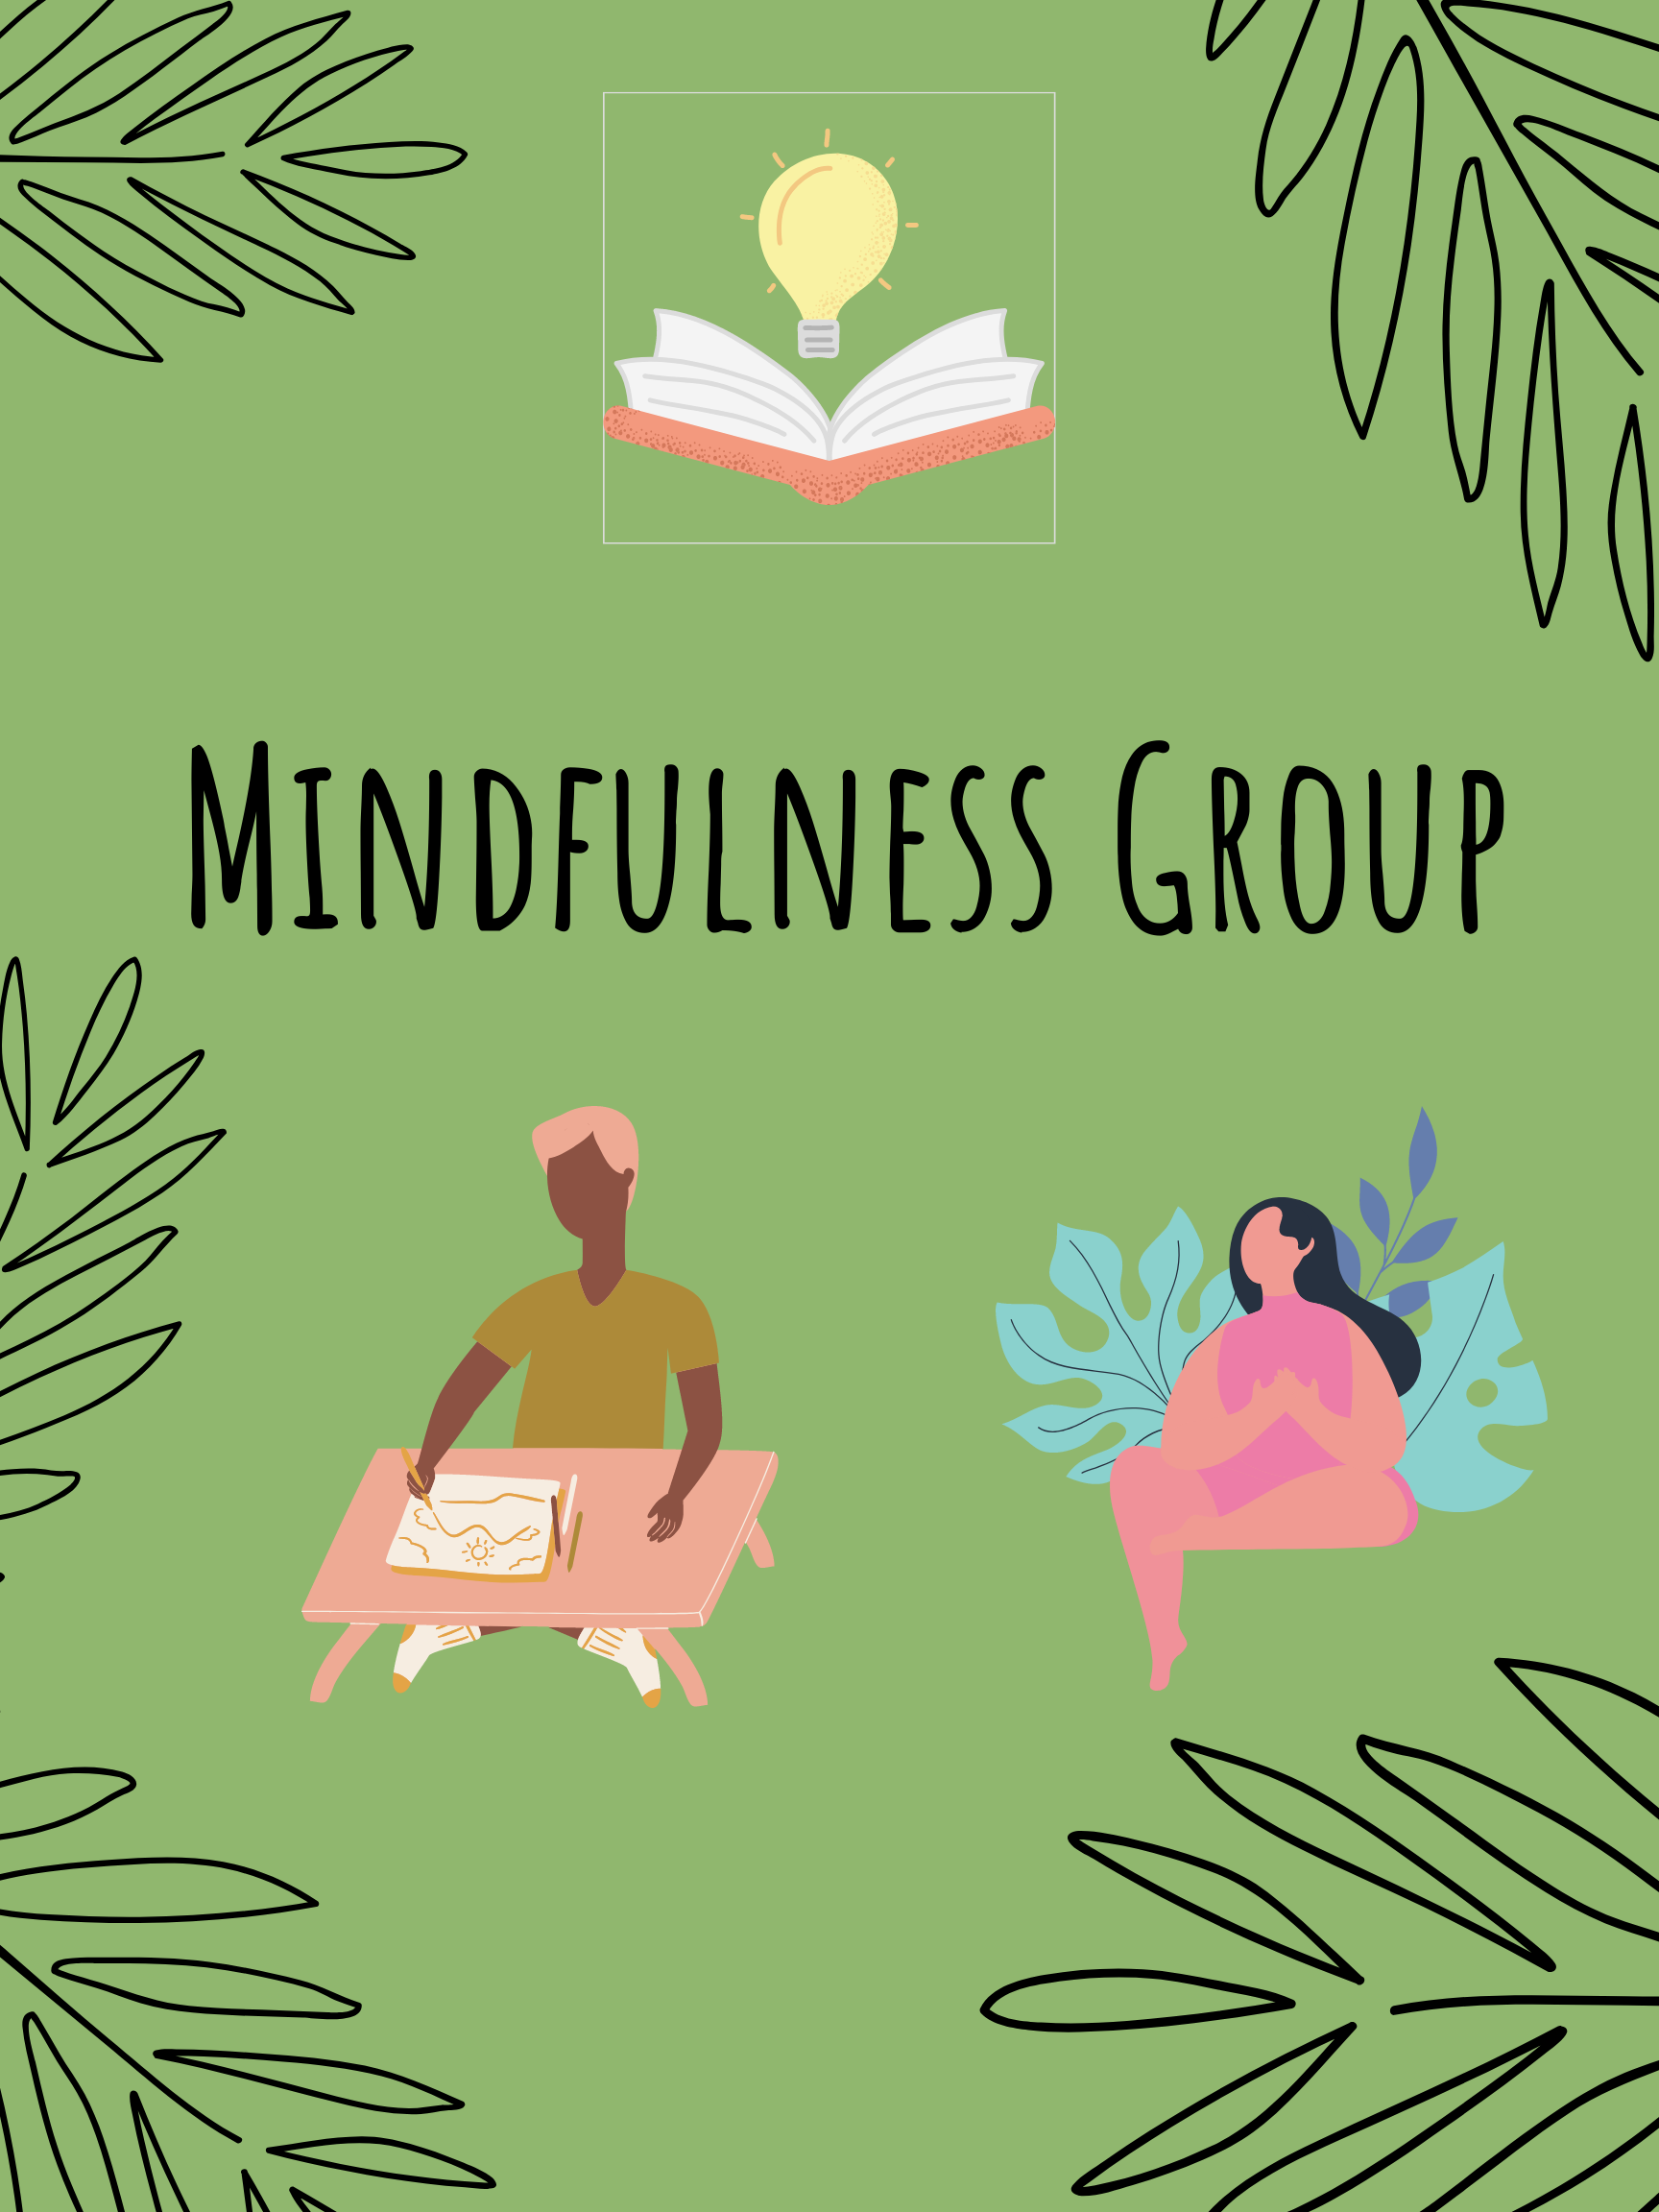 Mindfulness group text with lightbulb, book, and two figures on green background